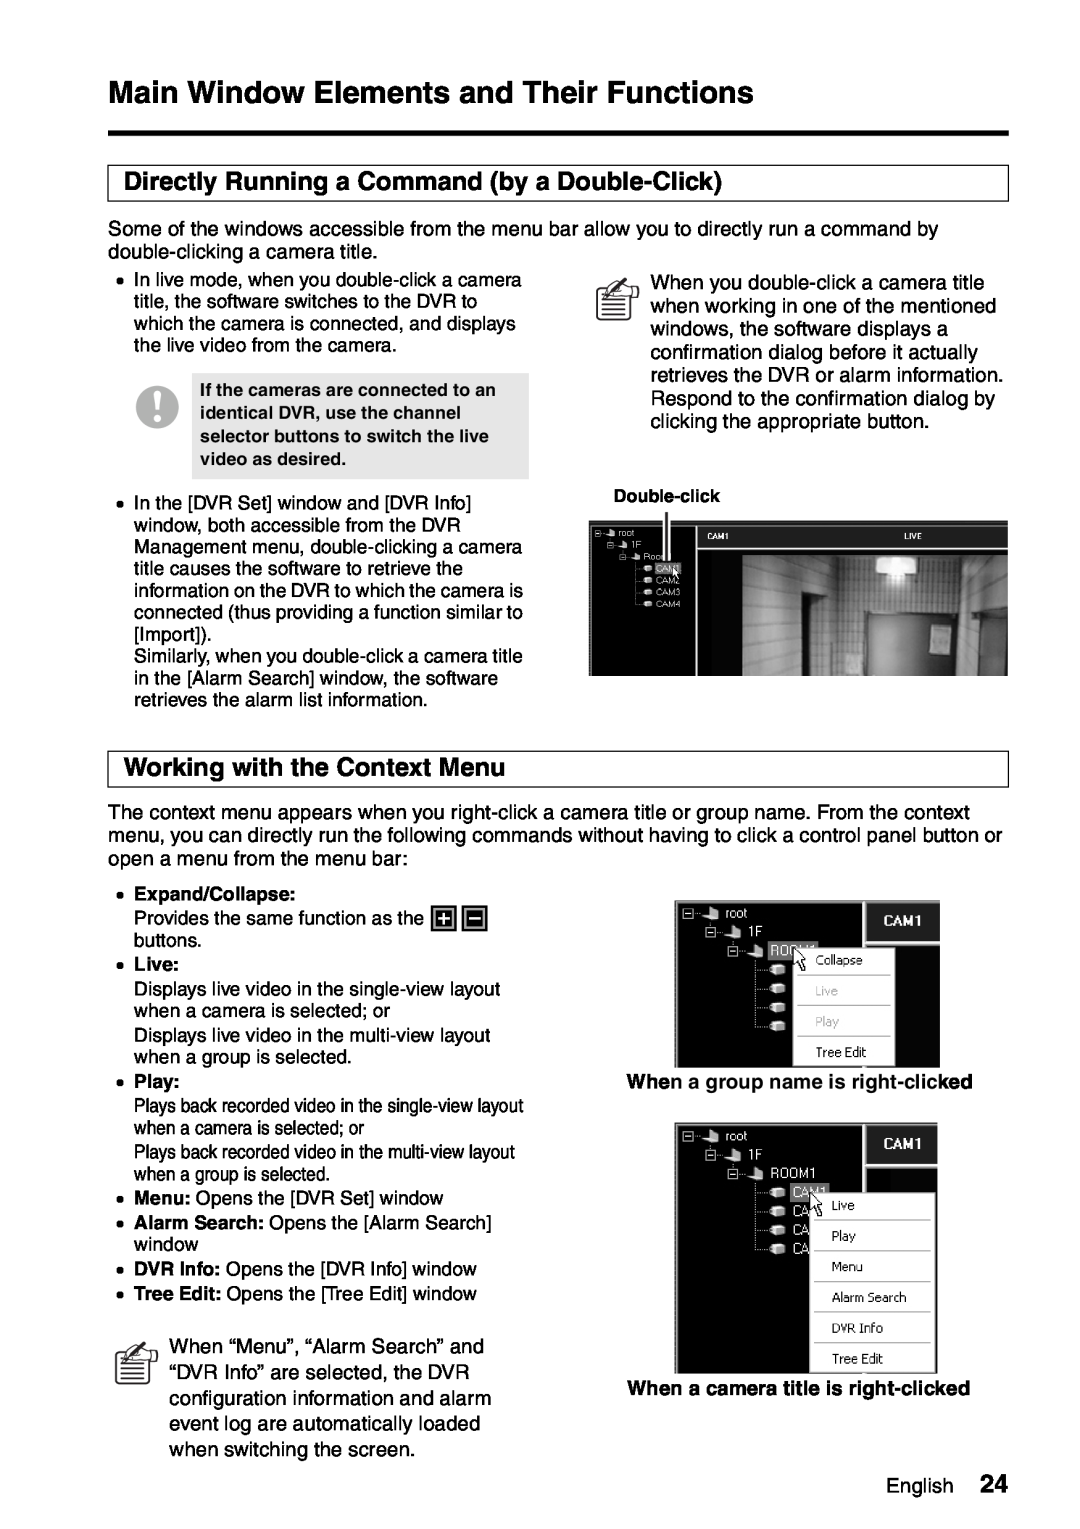 Sanyo VA-SW8000LITE instruction manual Directly Running a Command by a Double-Click, Working with the Context Menu 